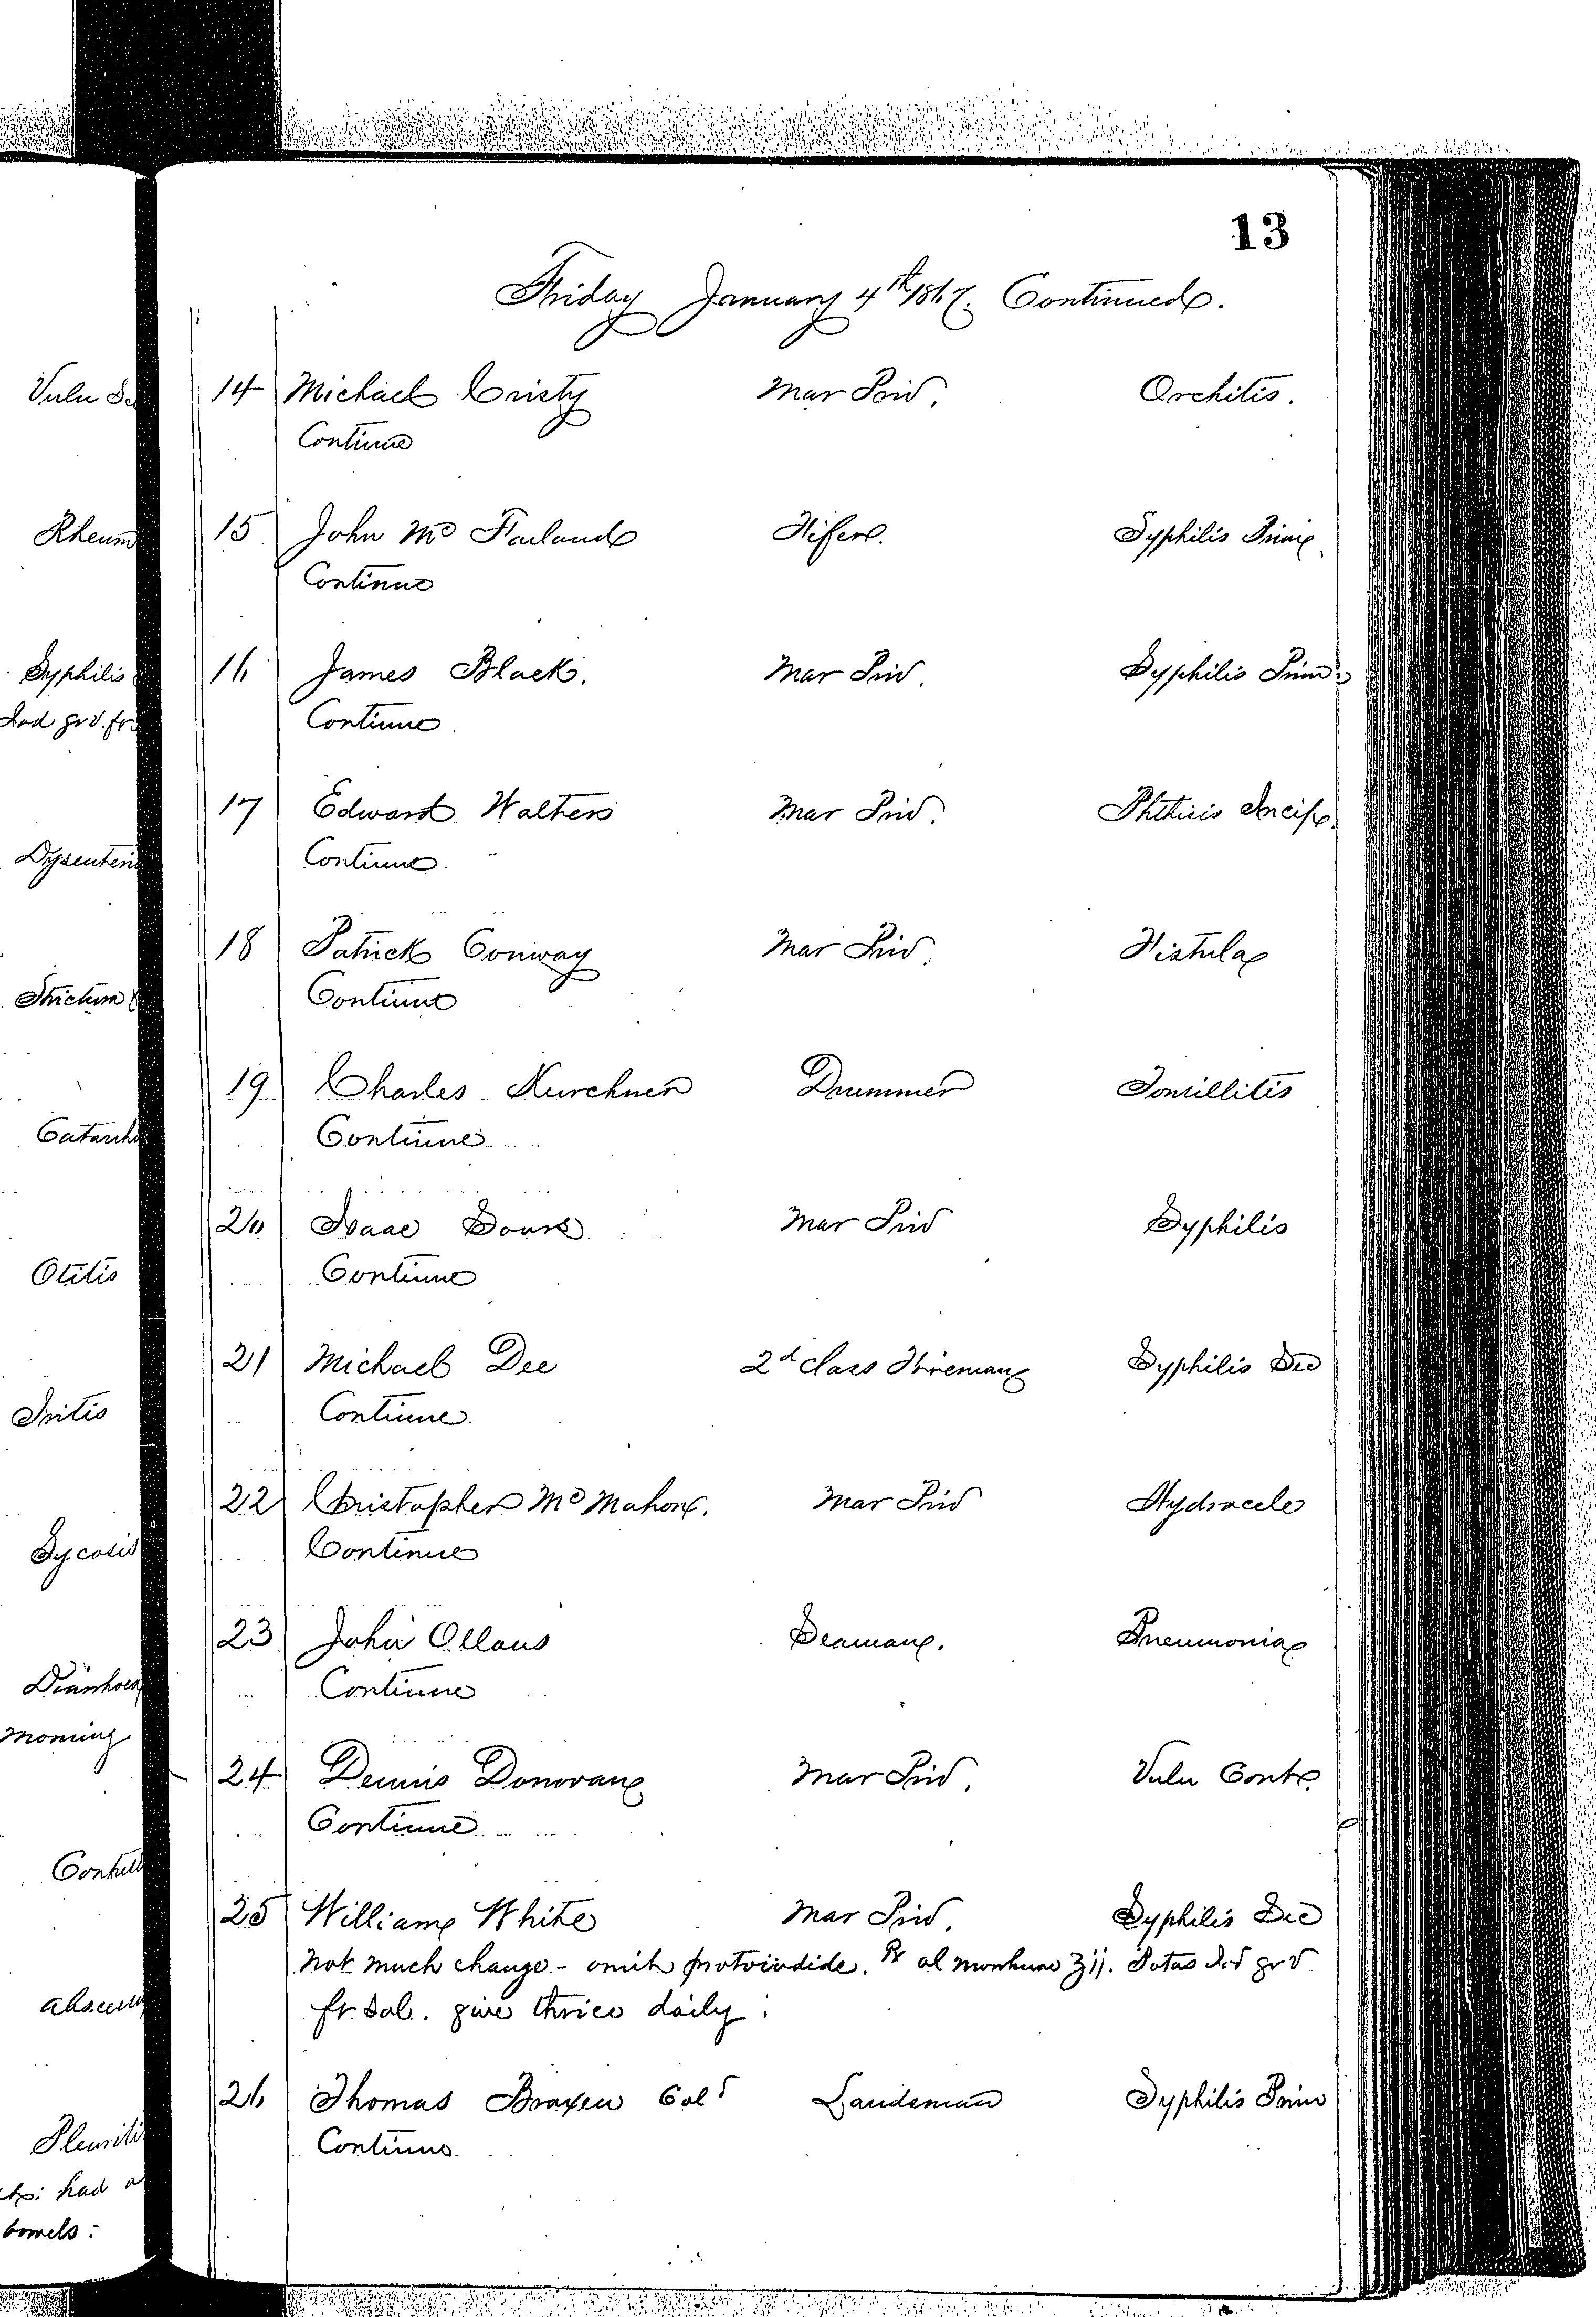 Patients in the Naval Hospital, Washington DC, on January 4, 1867, page 2 of 3, in the Medical Journal, October 1, 1866 to March 20, 1867